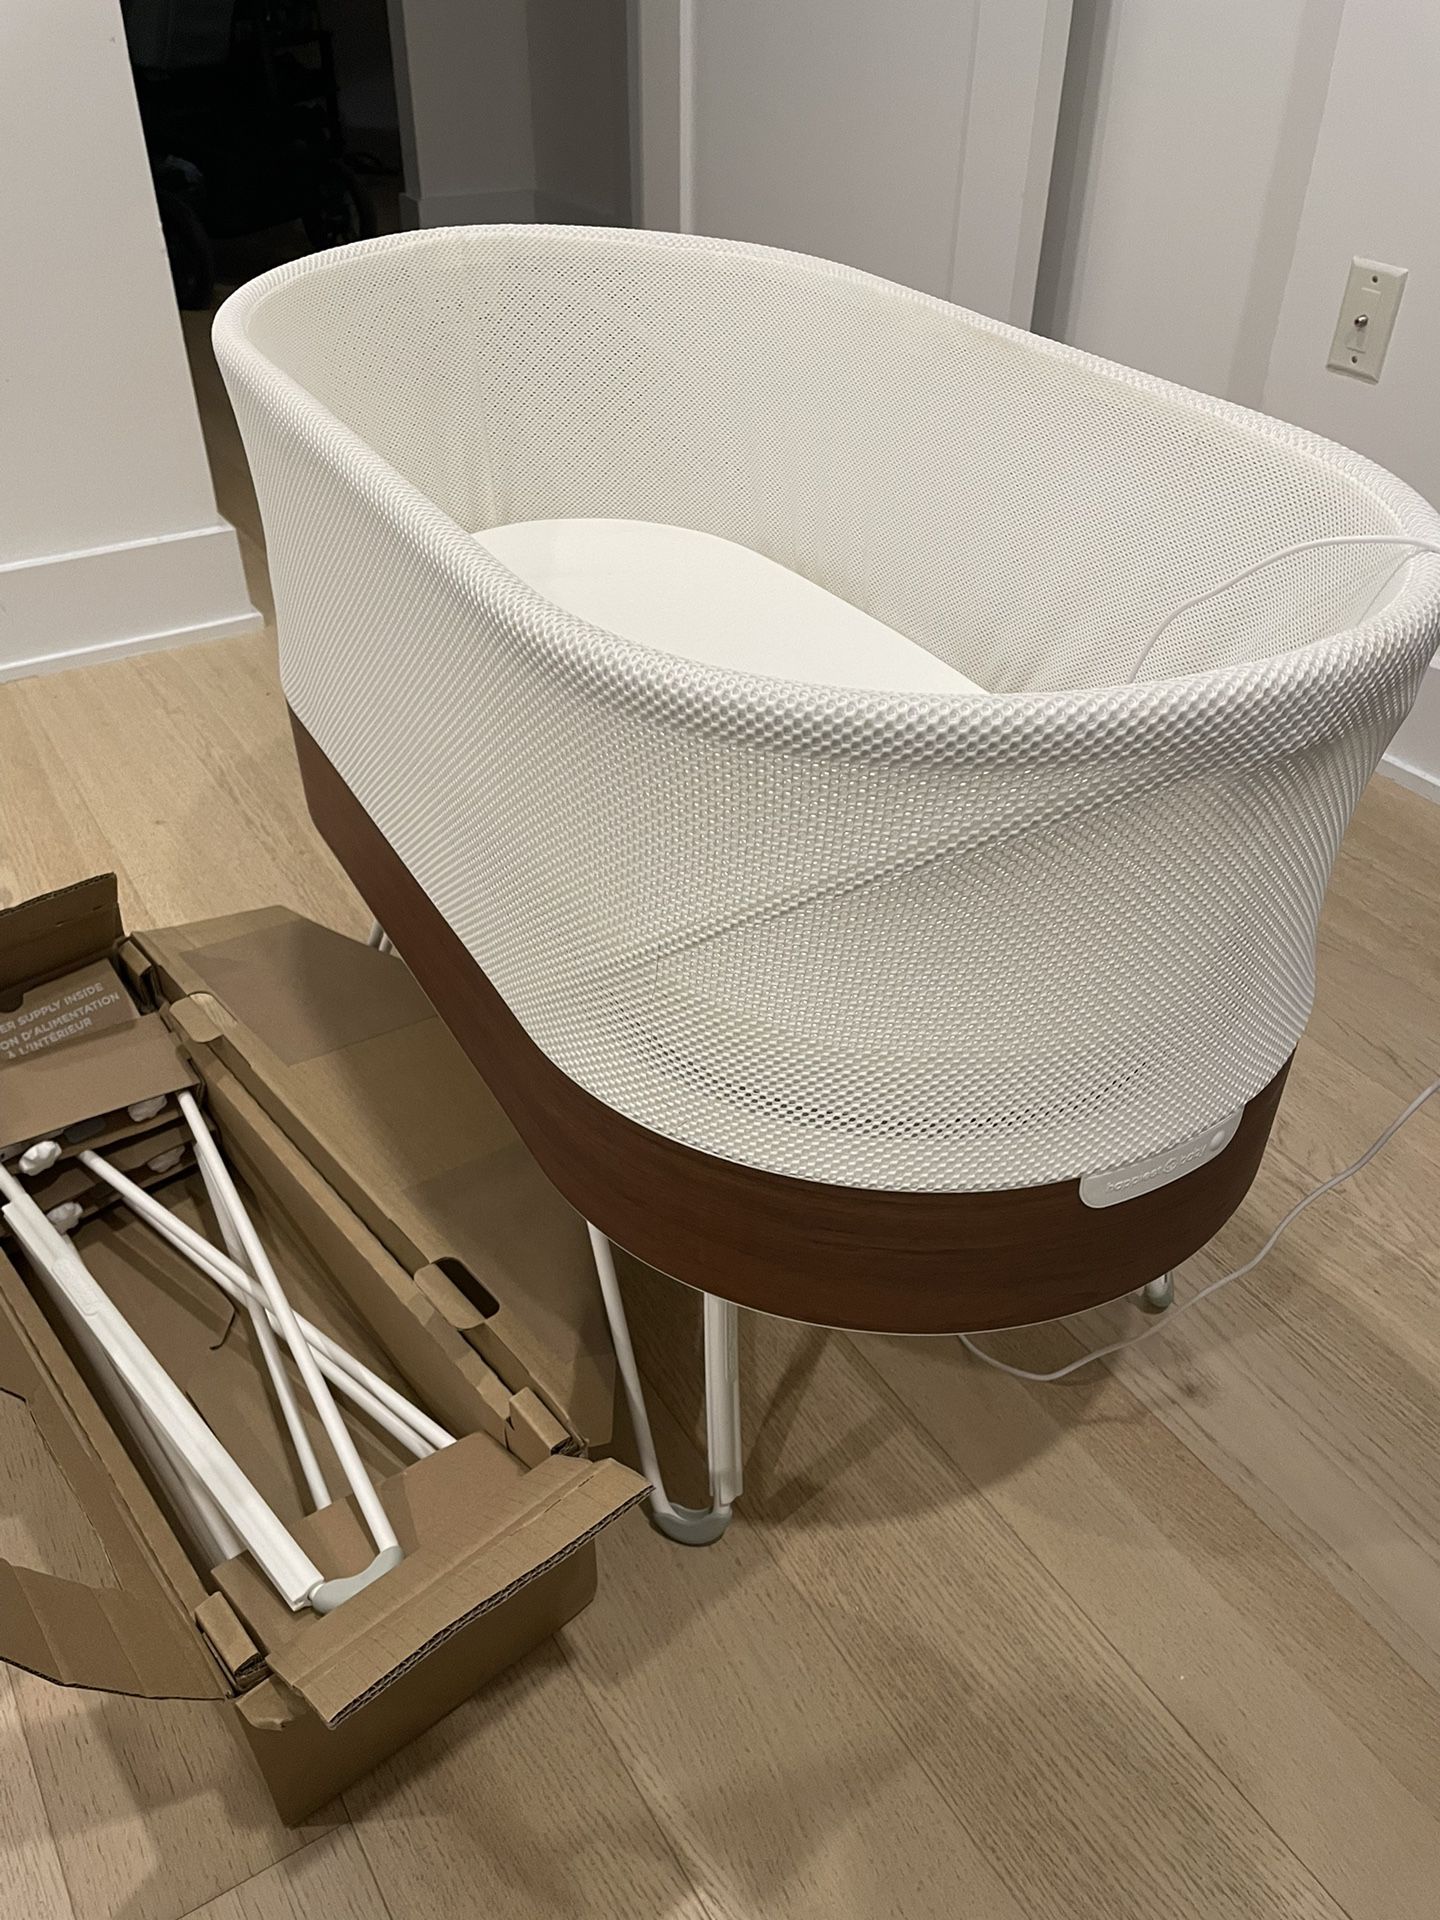 Snoo Bassinet With Lower Legs